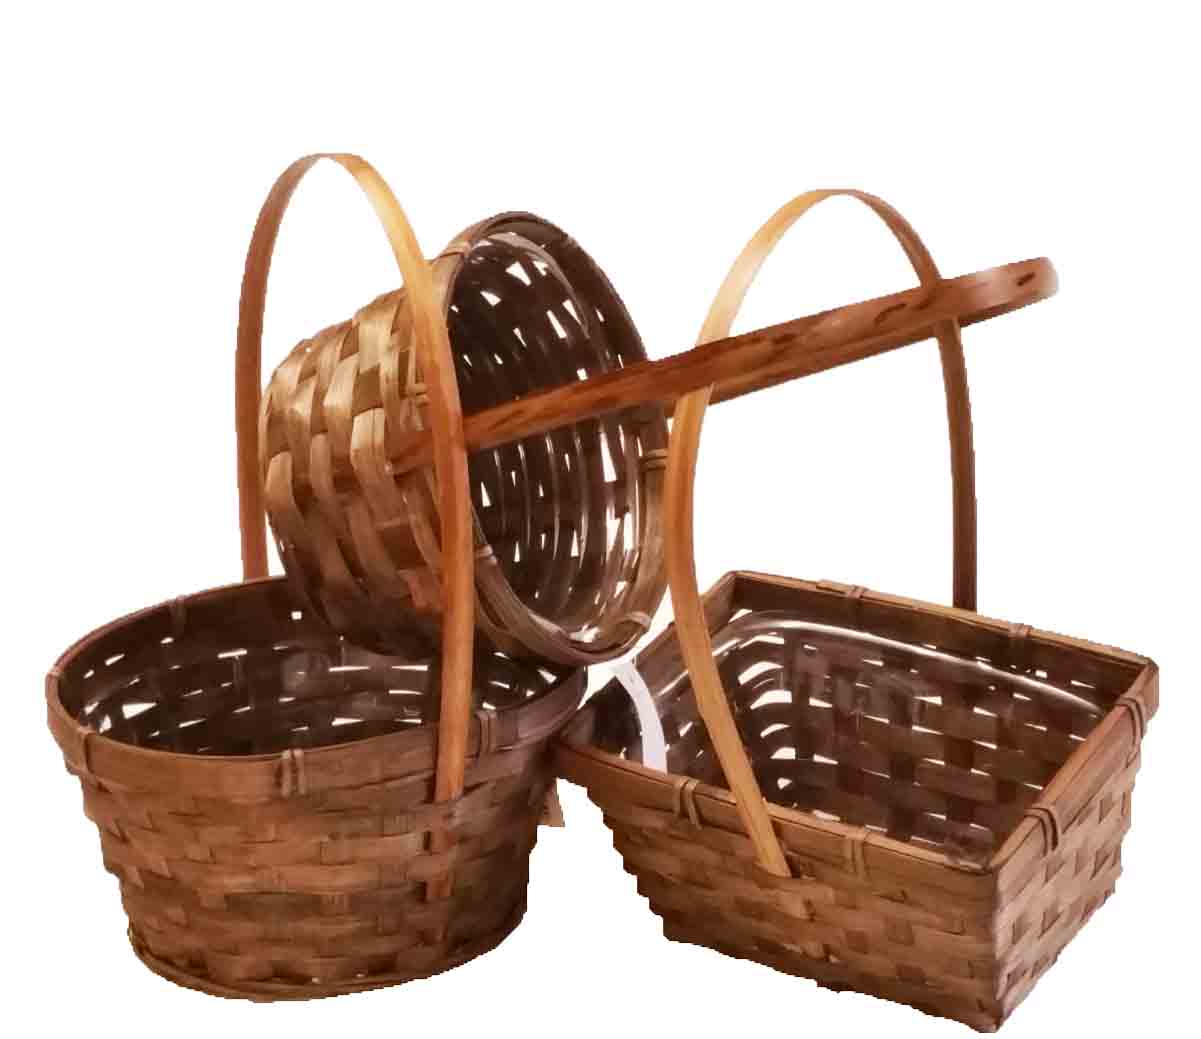 4101 - Brown Bamboo Baskets w/Liners - 4.25 ea, 3.85/72